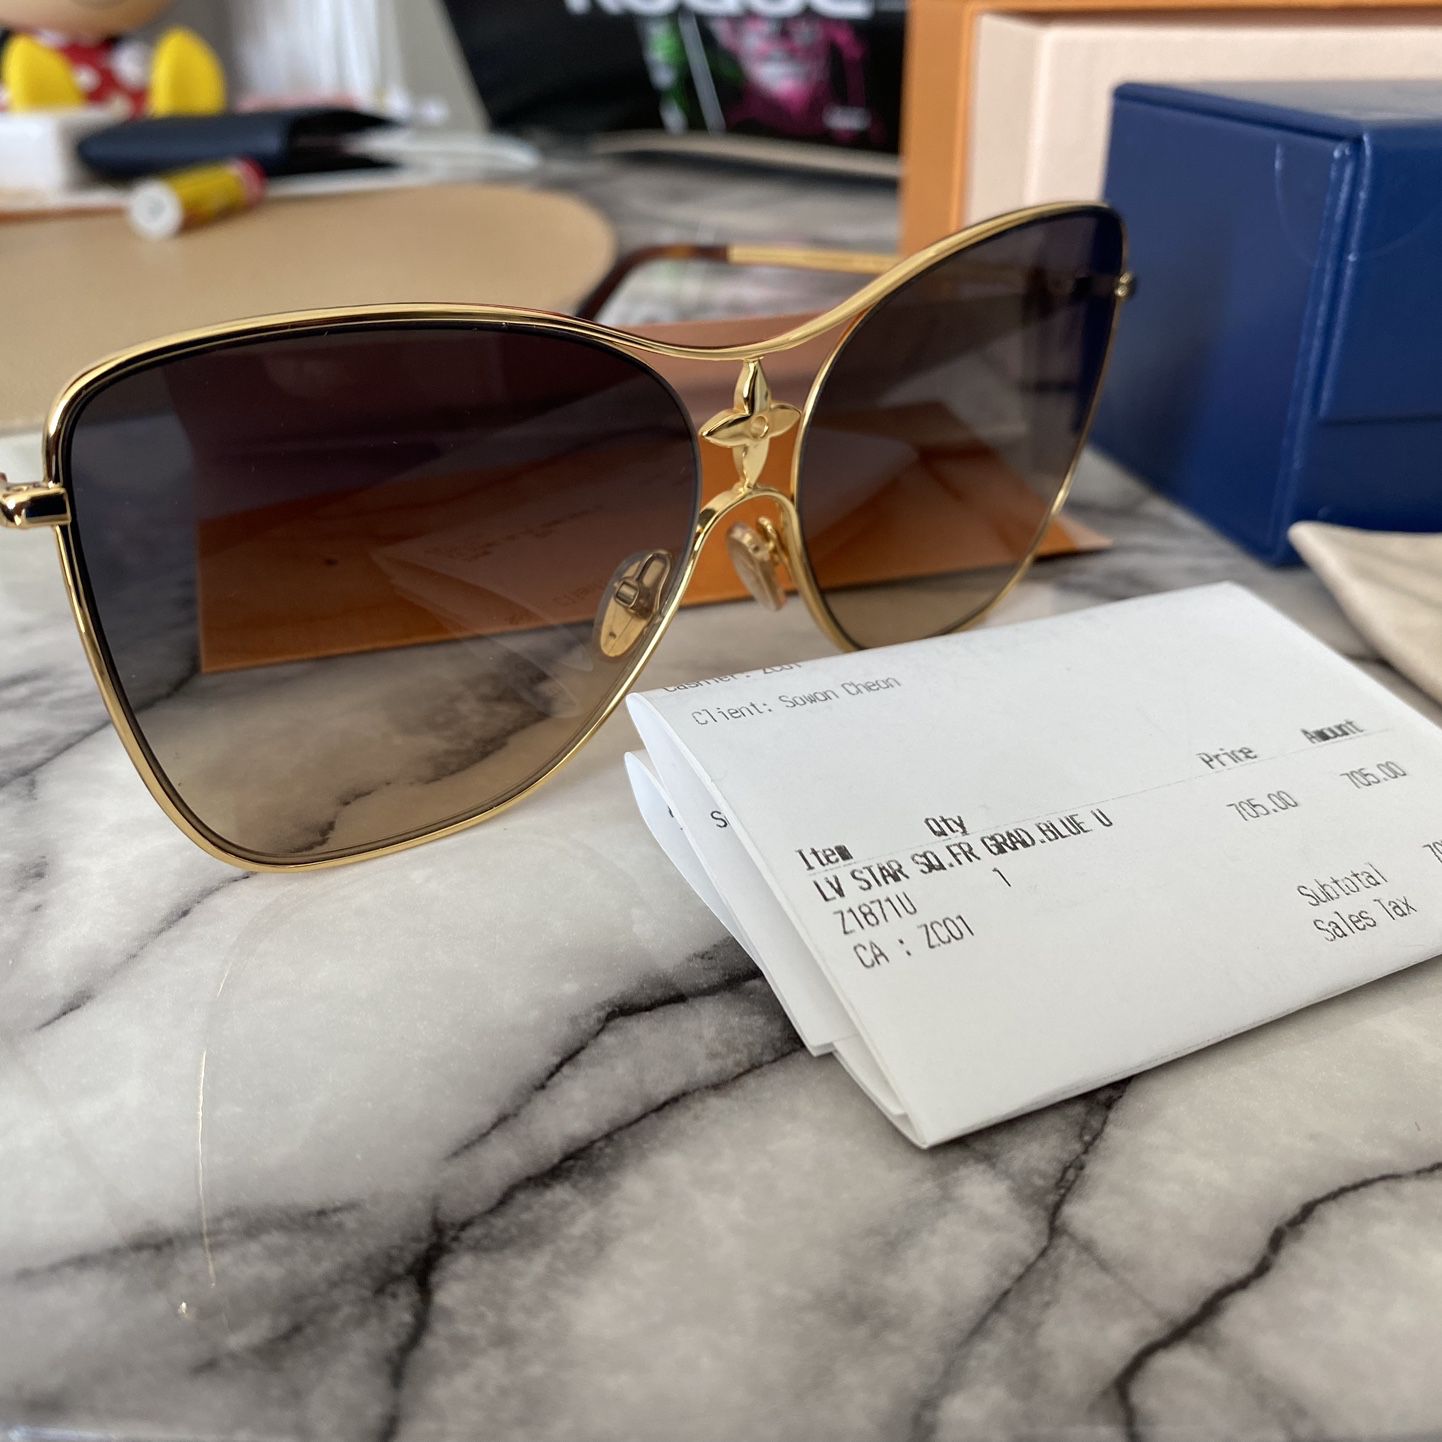 Louis Vuitton Sunglasses Case for Sale in Los Angeles, CA - OfferUp